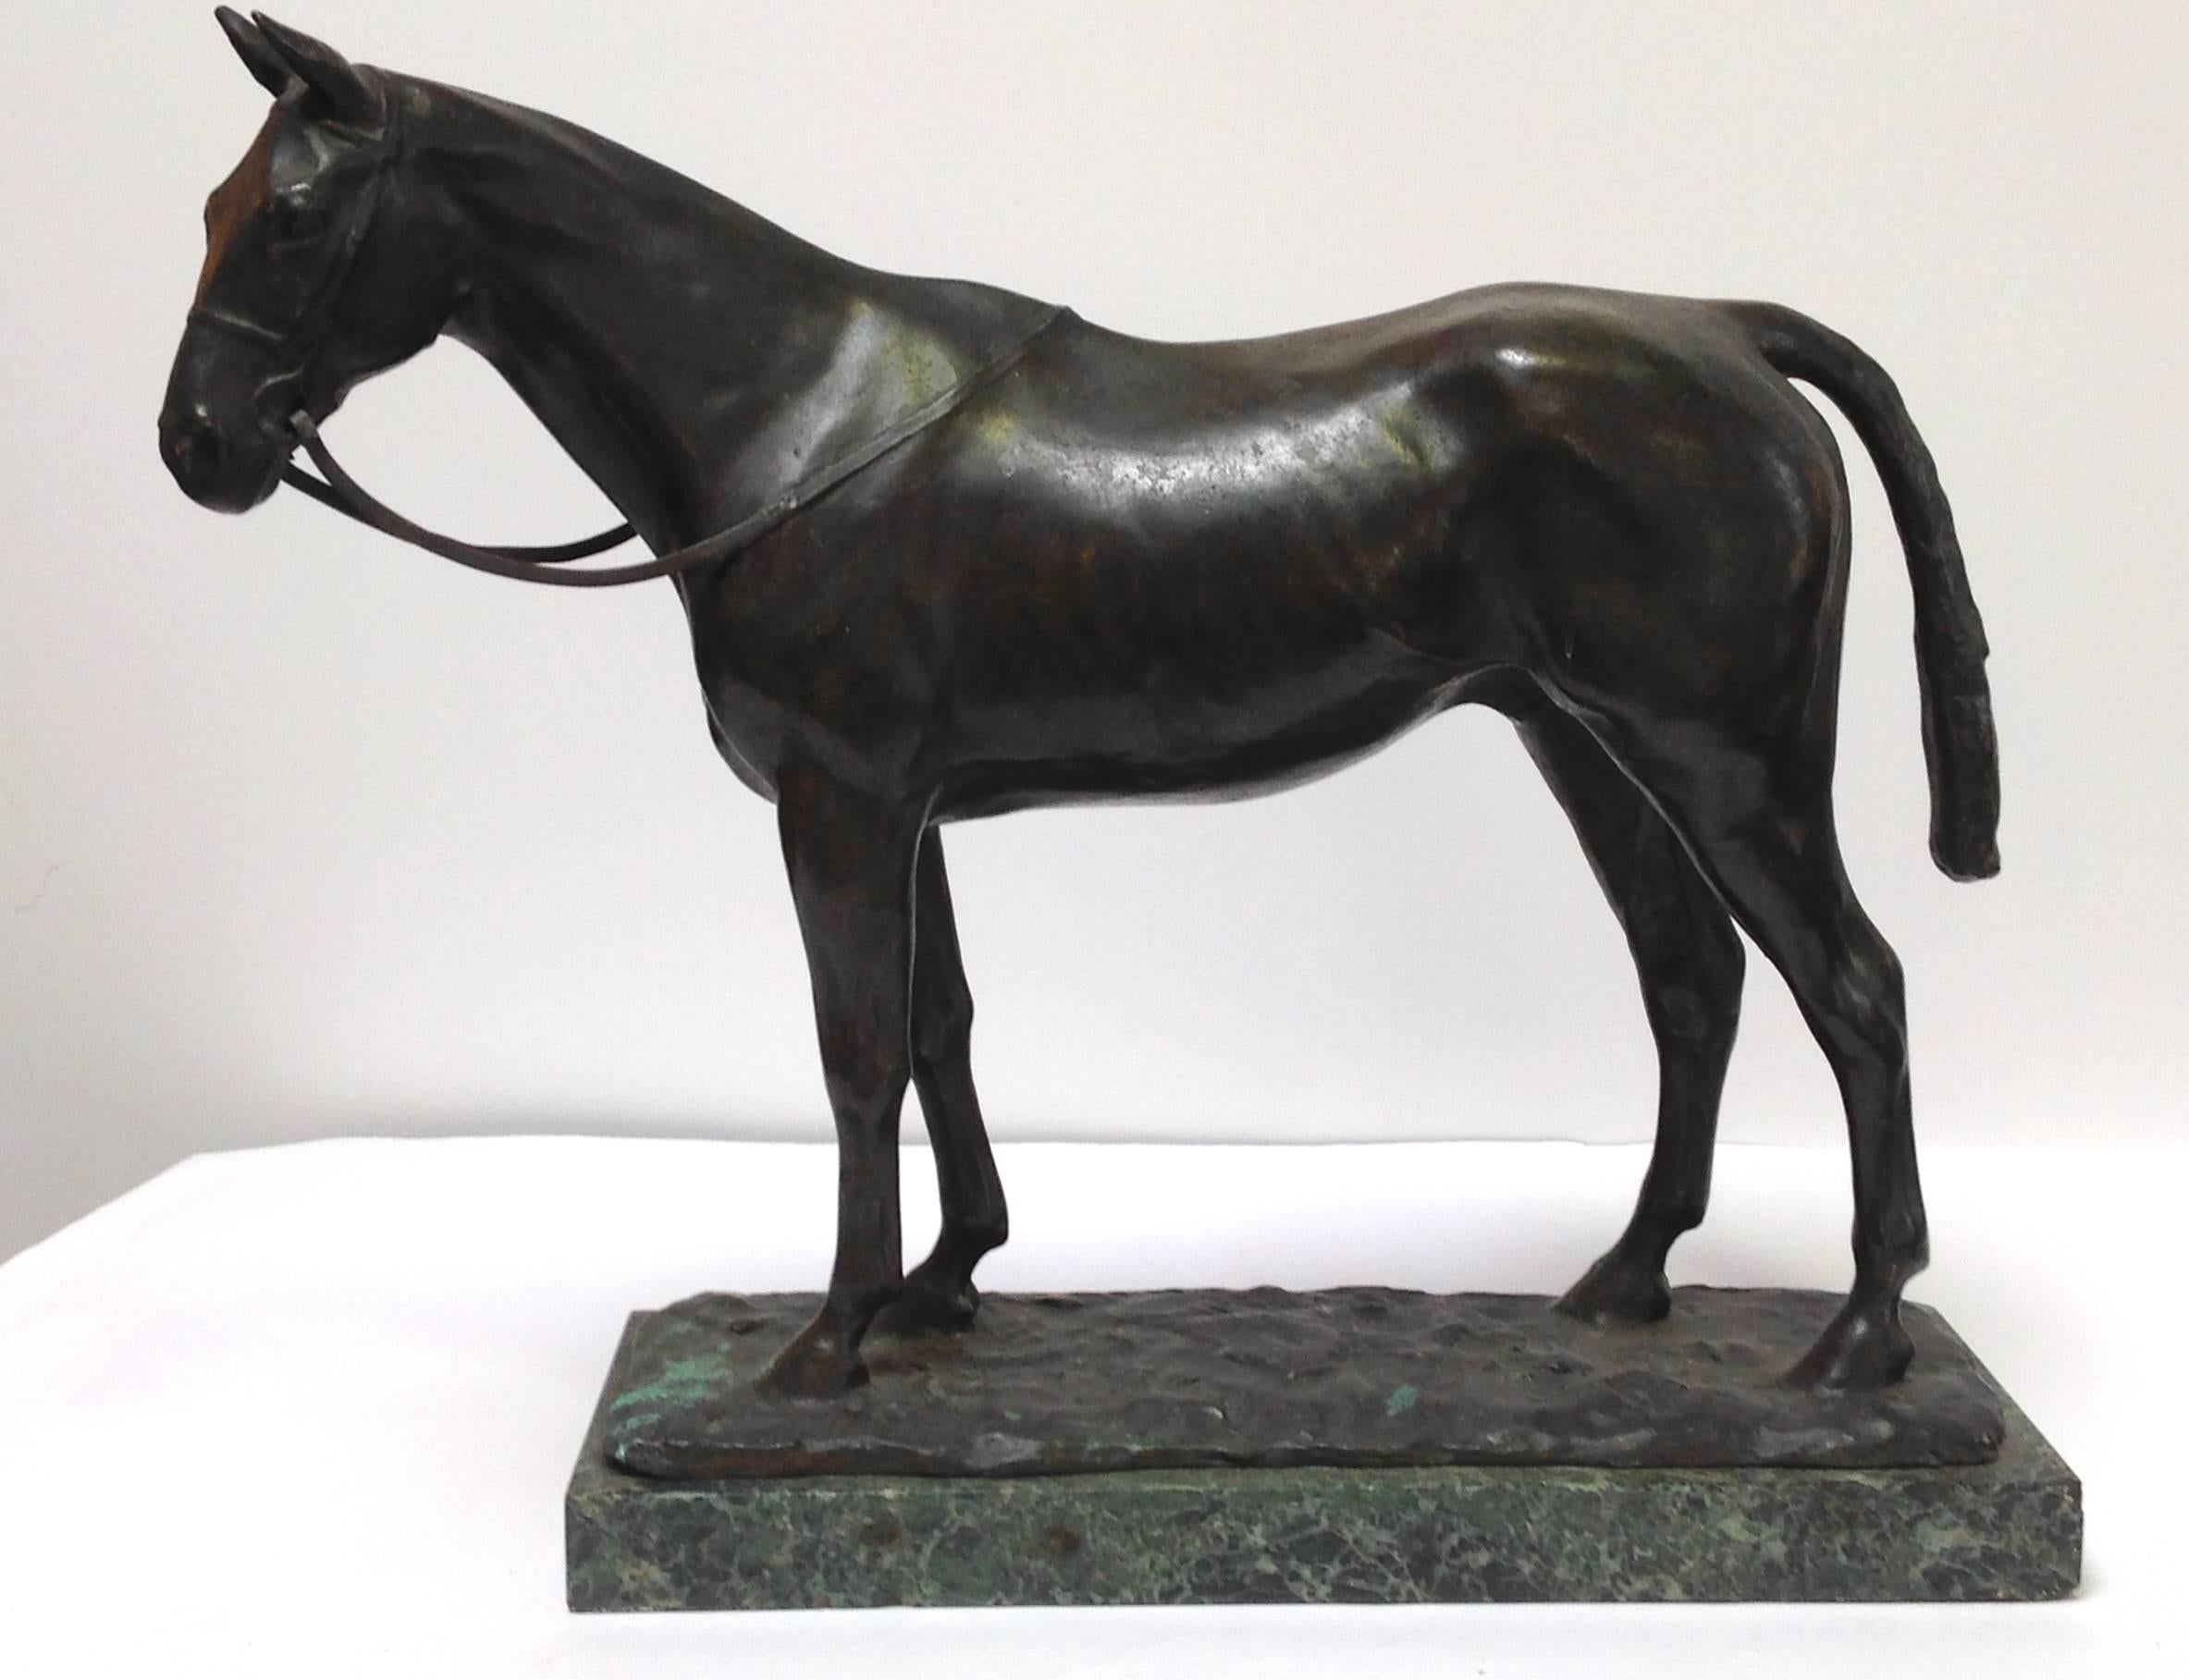 A cast bronze sculpture of Master Robert, the 1924 grand national winner
by Pauline Boumphre. The race was at the Aintree Racecourse in Liverpool, England.